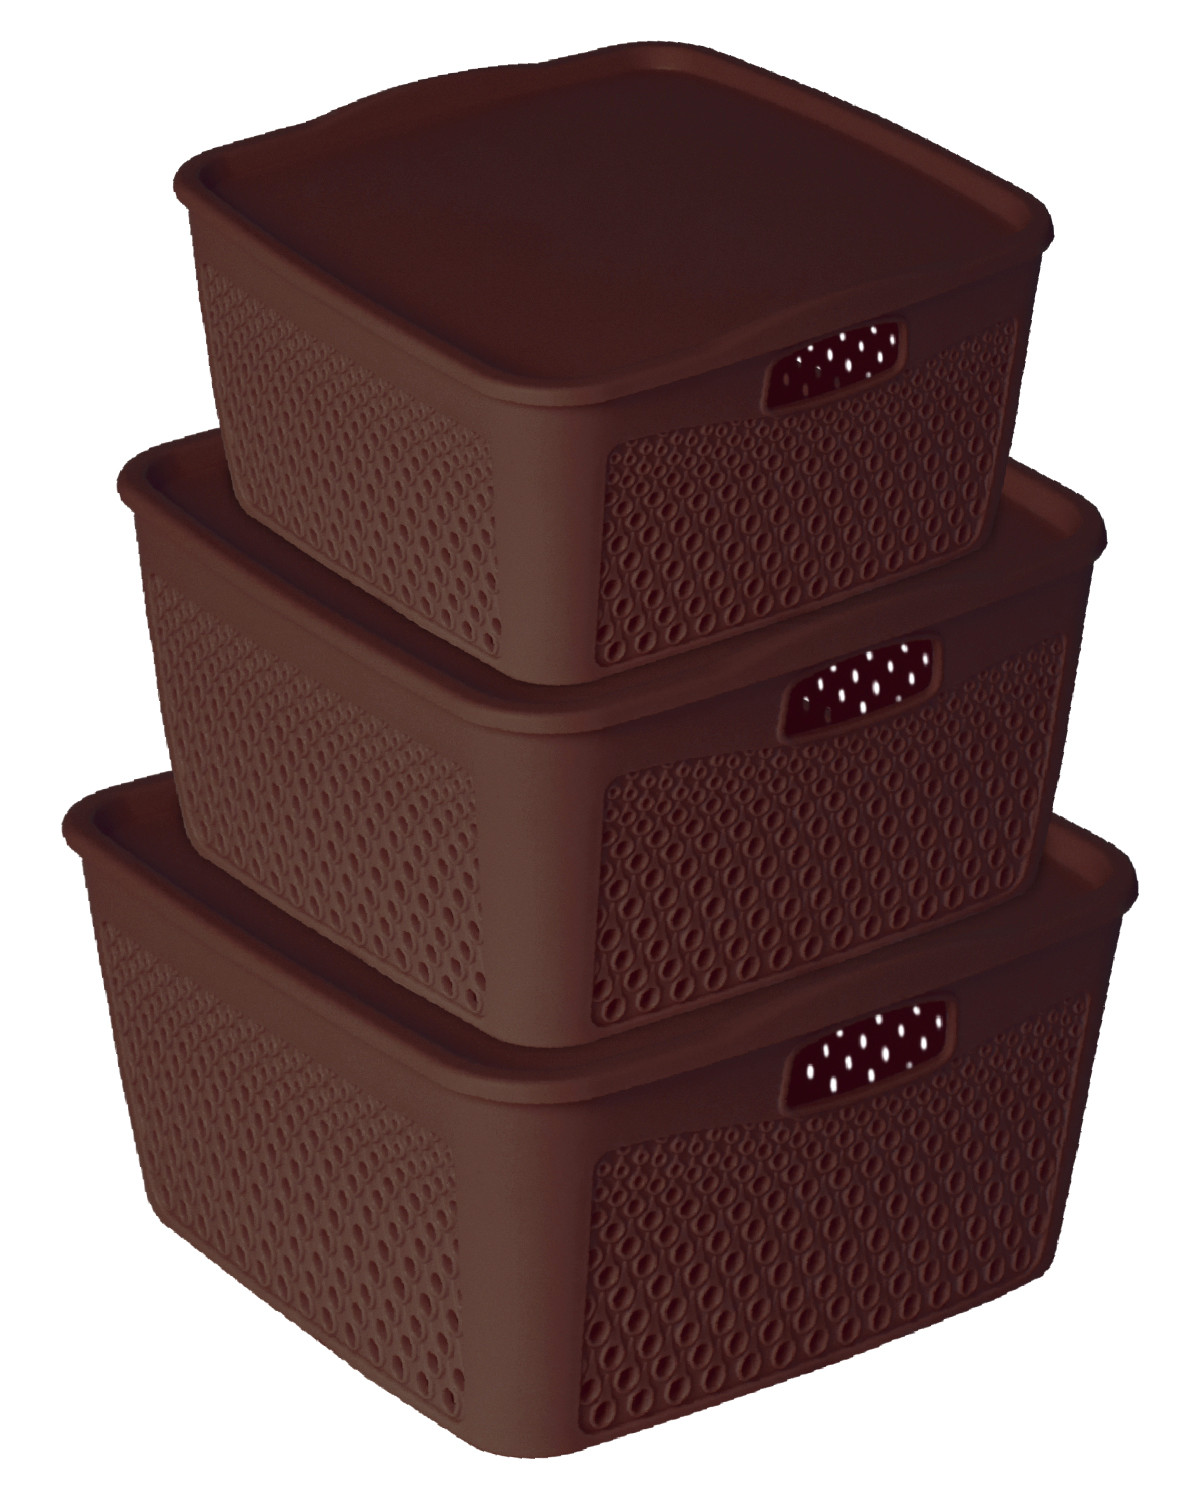 Kuber Industries Netted Design Unbreakable Multipurpose Square Shape Plastic Storage Baskets with lid Small, Medium, Large Pack of 3 (Brown)